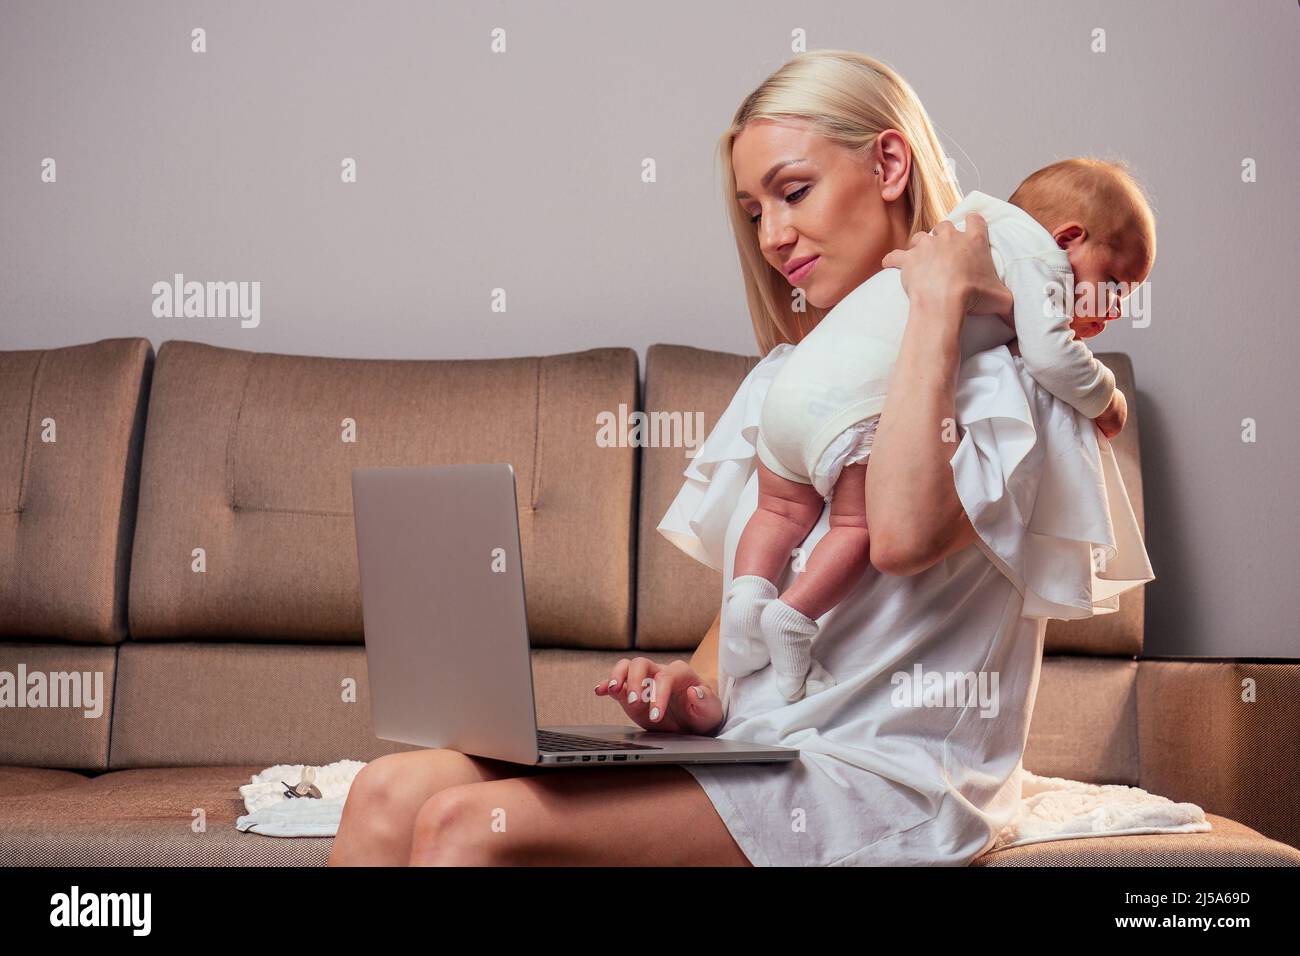 Happy single blonde mother working online and taking care of her baby surfing question on the internet Stock Photo